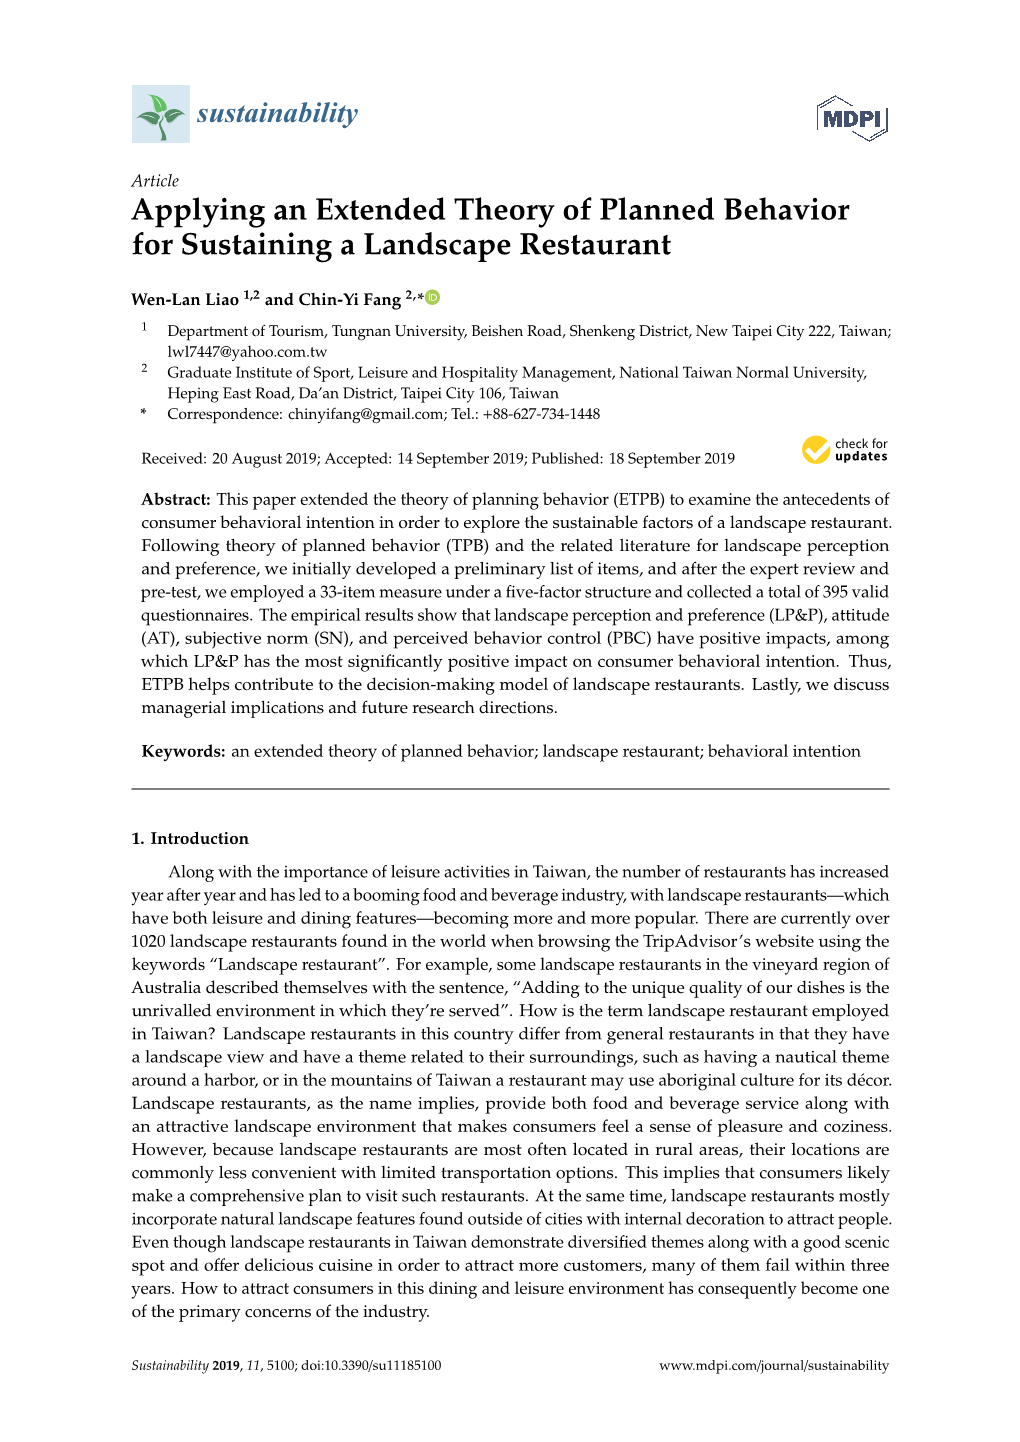 Applying an Extended Theory of Planned Behavior for Sustaining a Landscape Restaurant